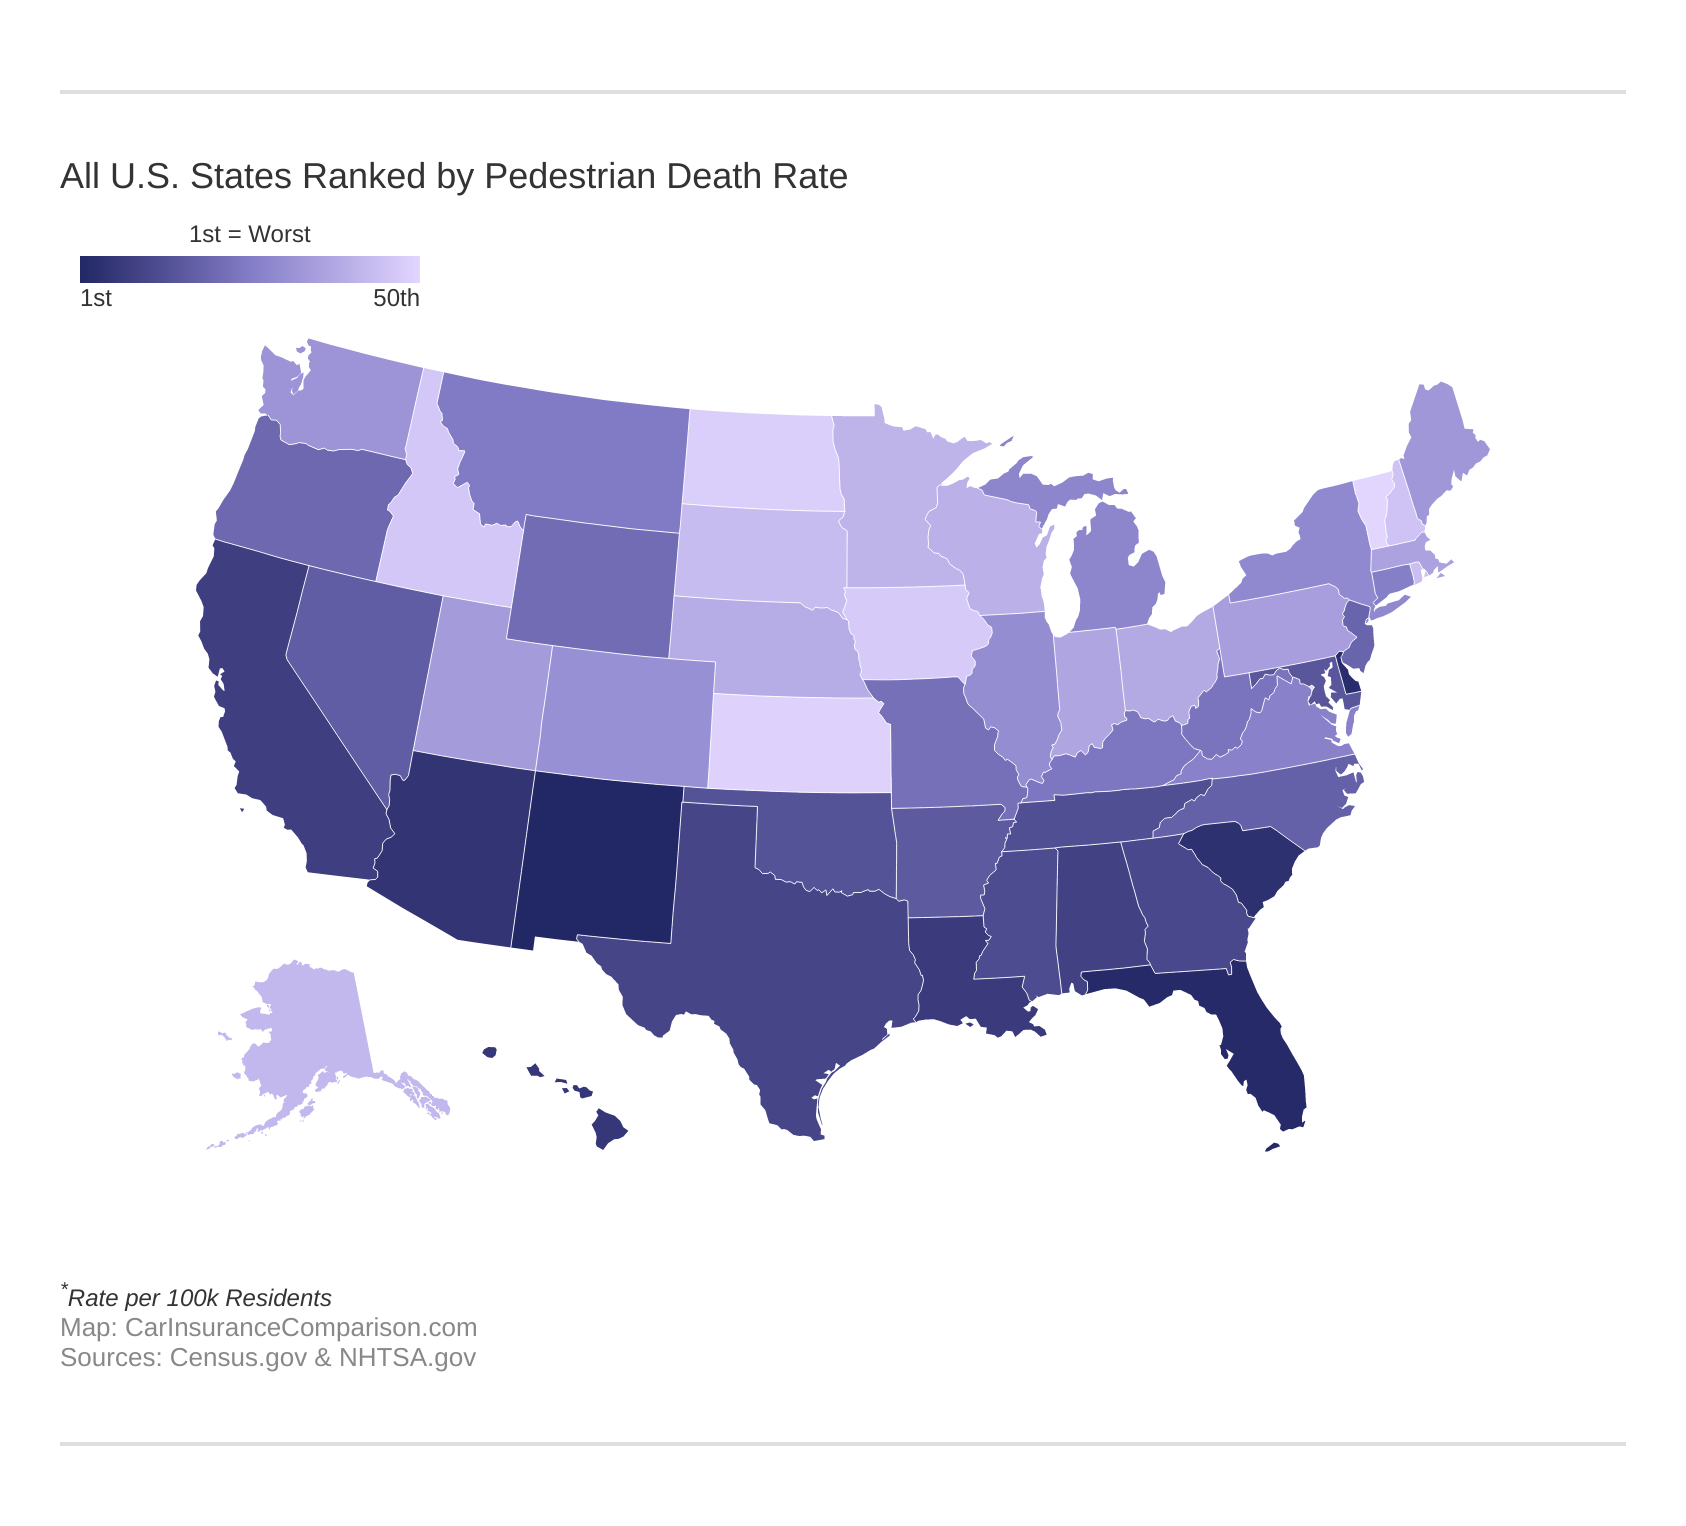 All U.S. States Ranked by Pedestrian Death Rate